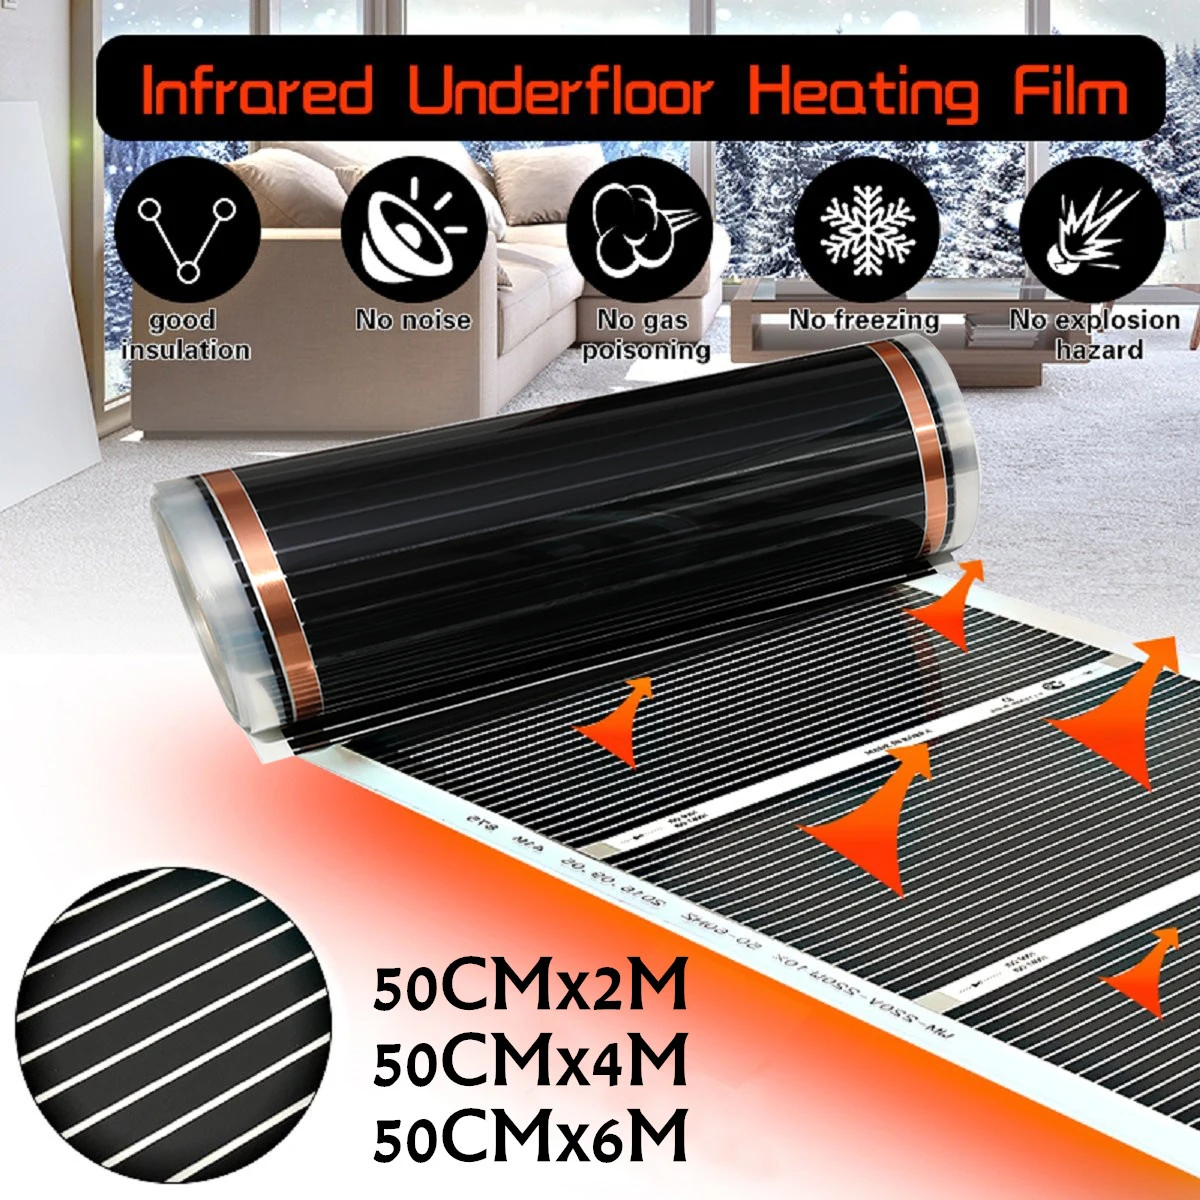 MINCO HEAT Infrared Heating Film 220V Electric Warm Floor System 50CM Width 220W/m2 Heating Foil Mat Made In Korea